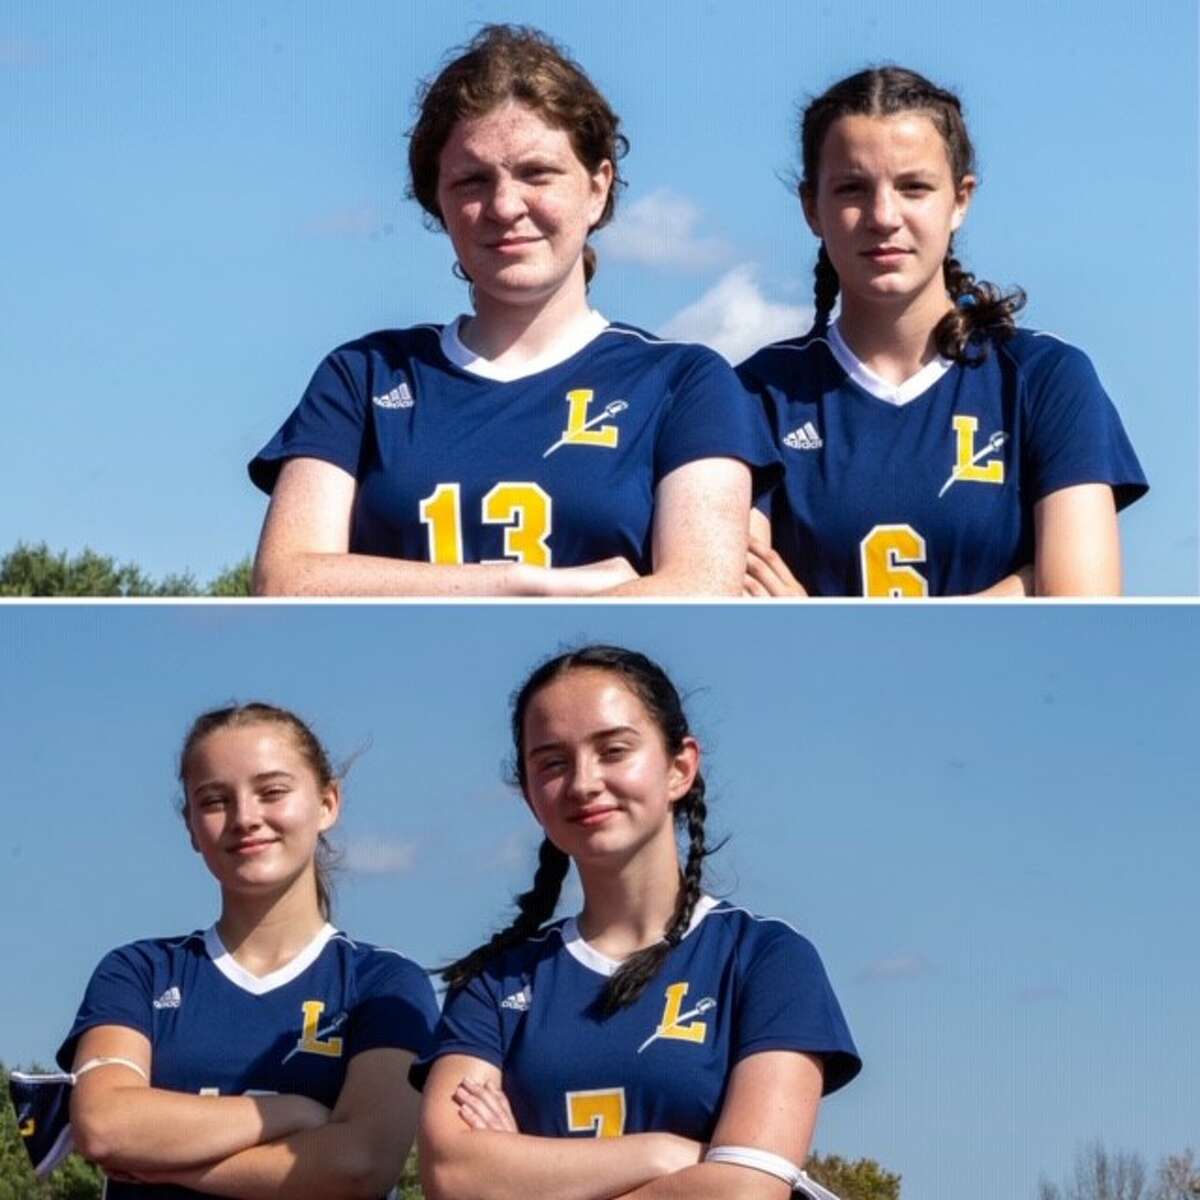 On the top is Emily and Sarah Bailey and on the bottom is Emily and Sophie Evans of the Ledyard girls soccer team.